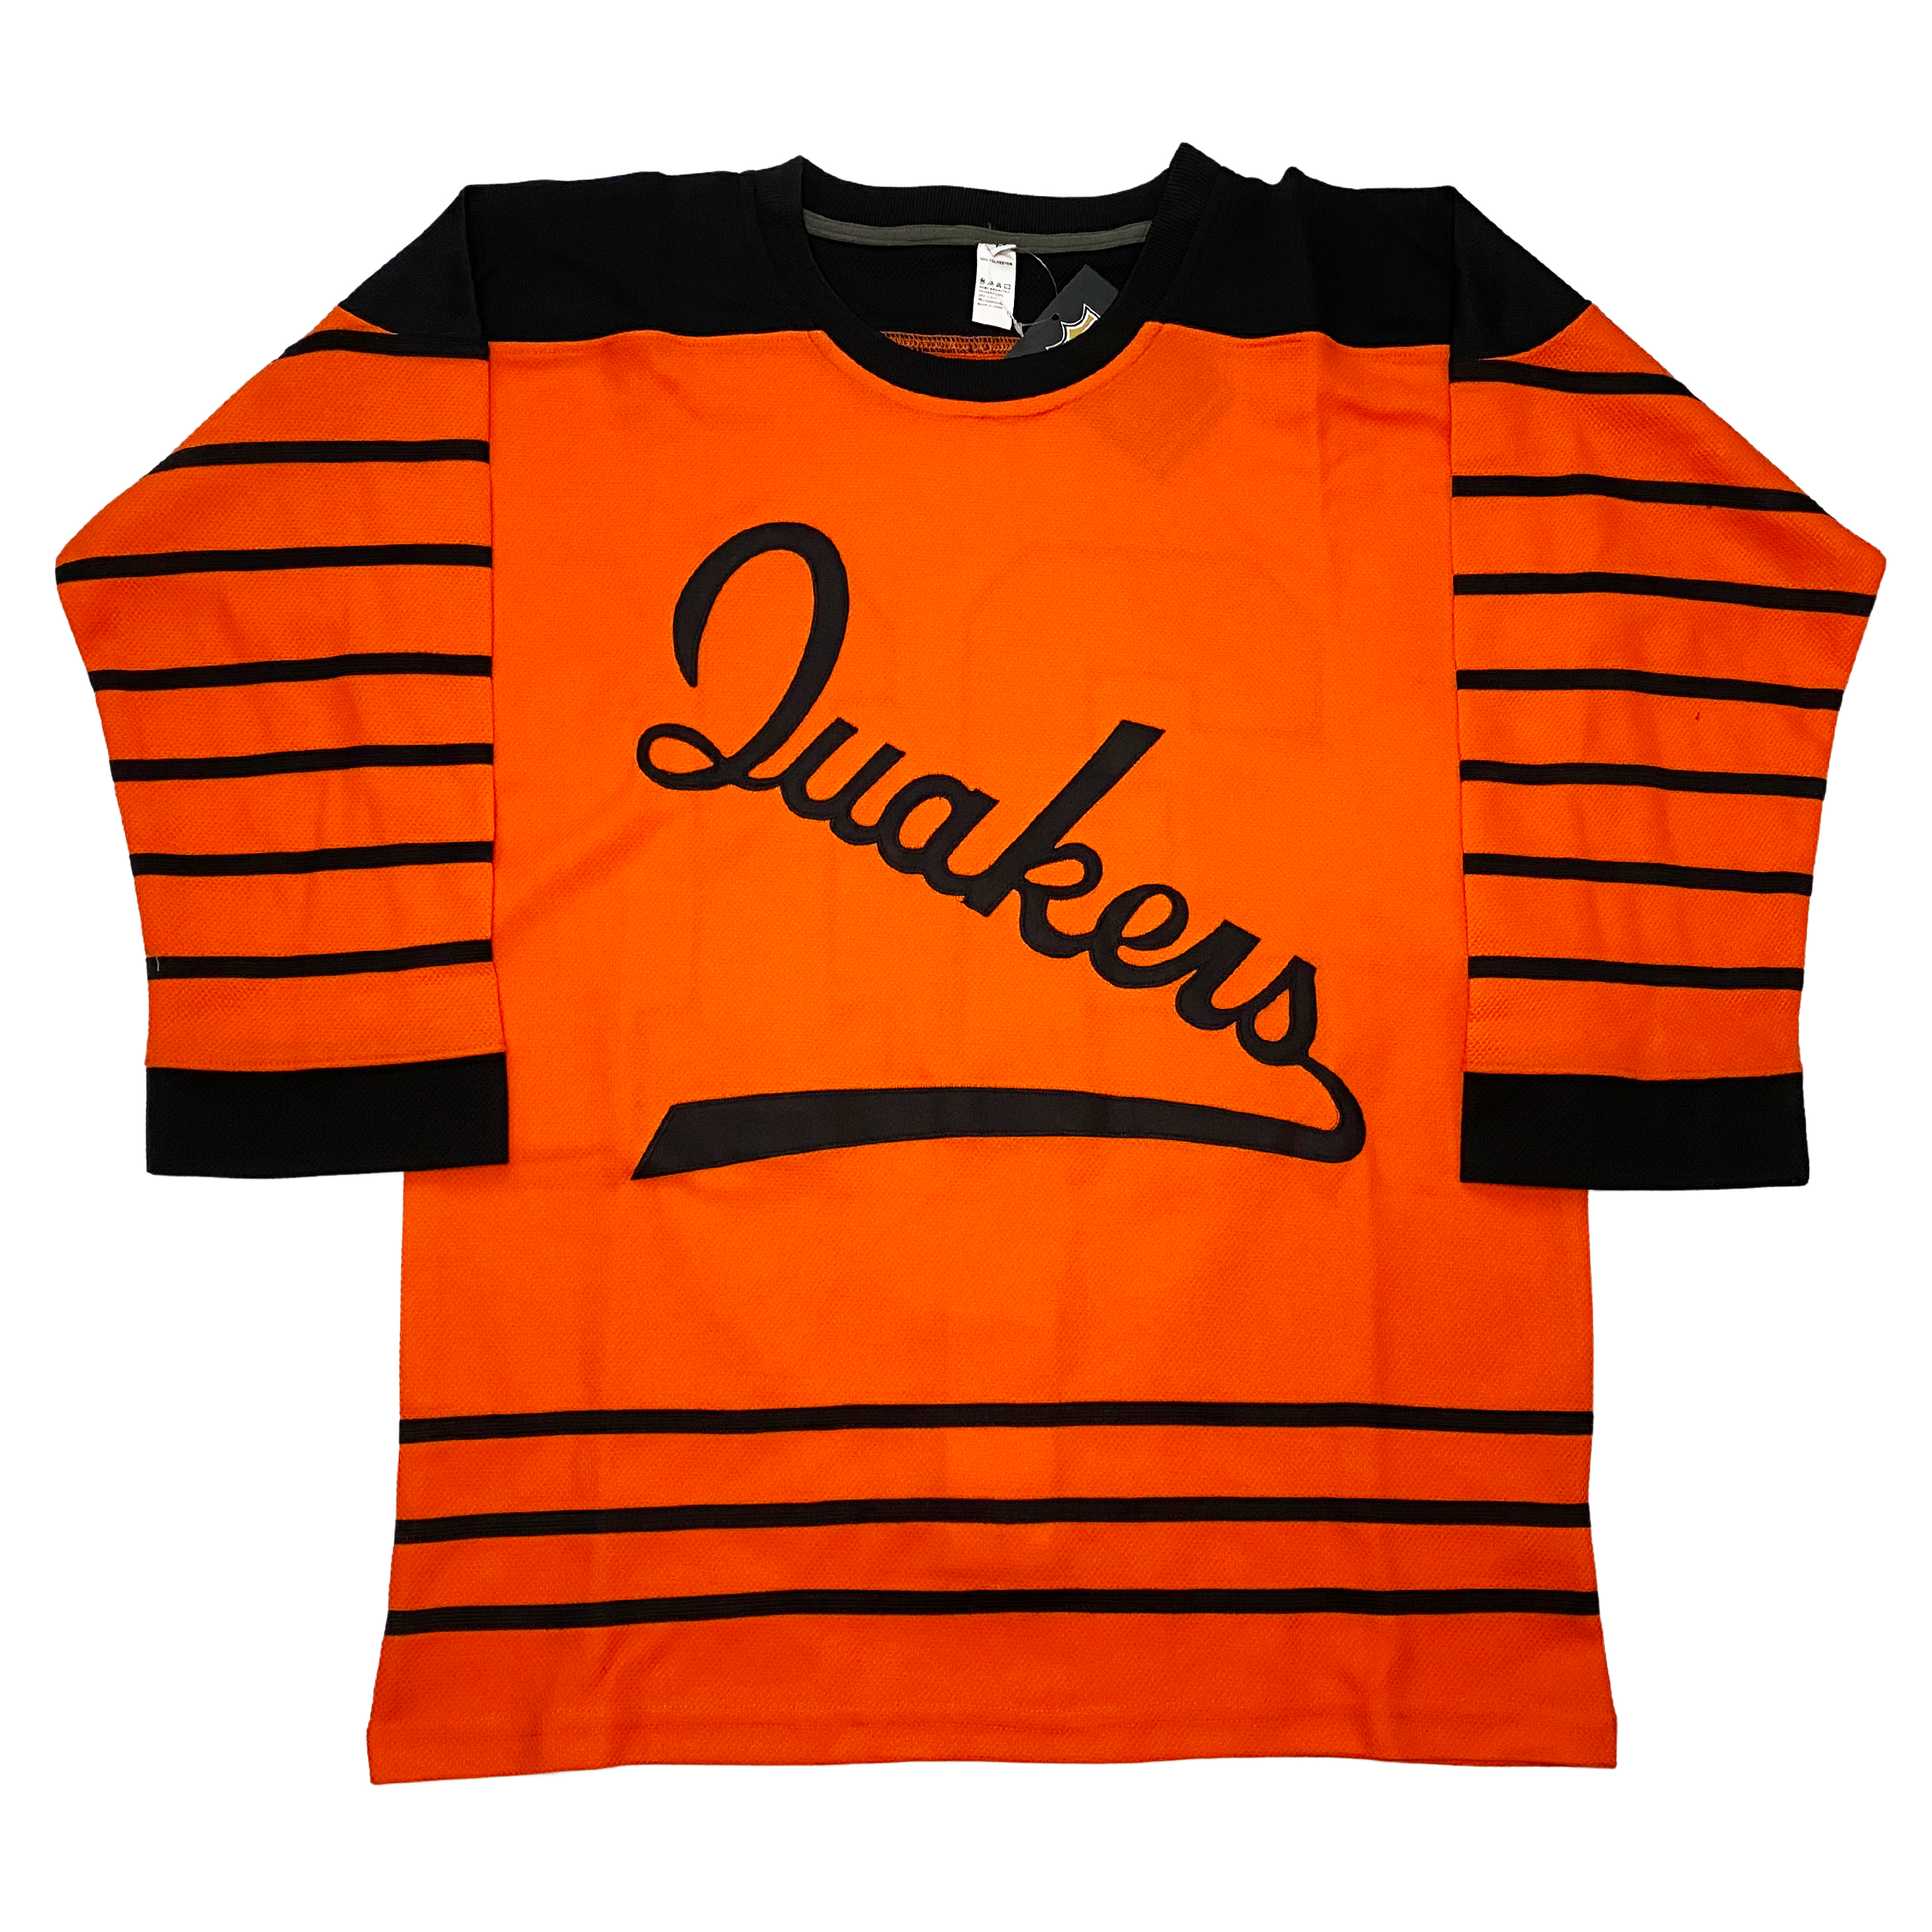 flyers quakers jersey